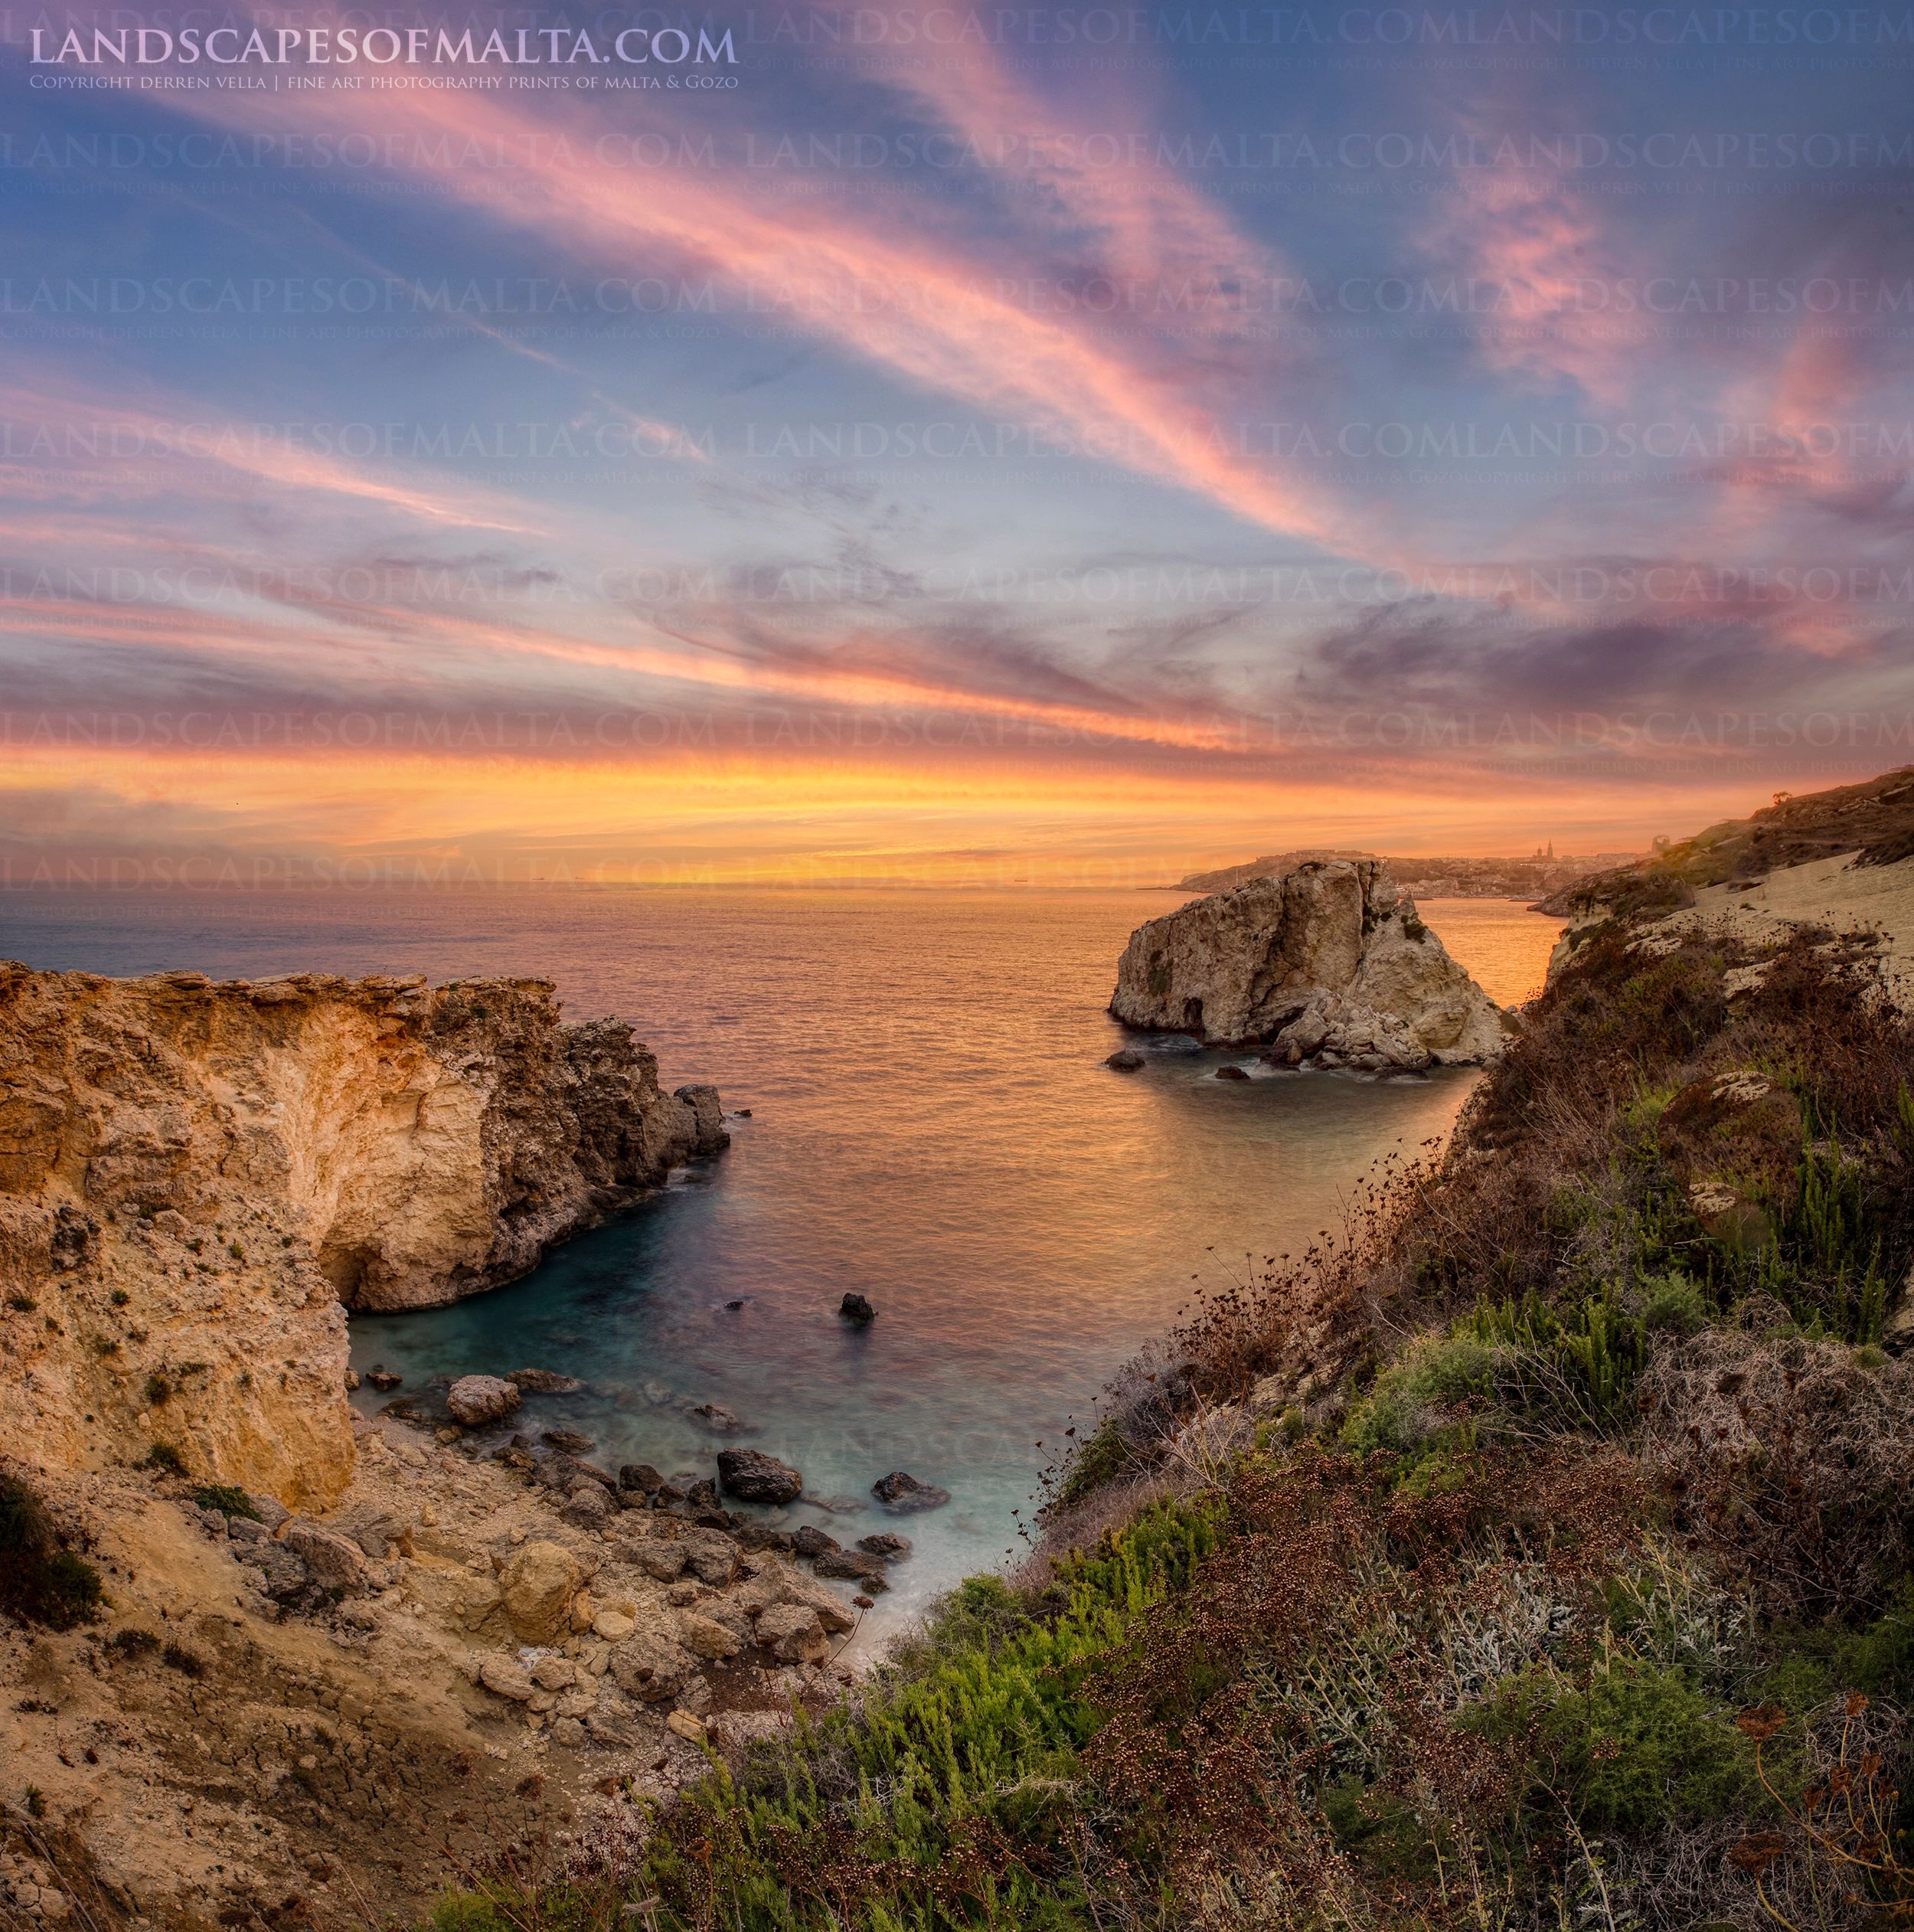 GEBEL TAC-CAWL IN GOZO.
Nice sunset in Qala Gozo over il-Gebel tac-cawl by landscape photographer 